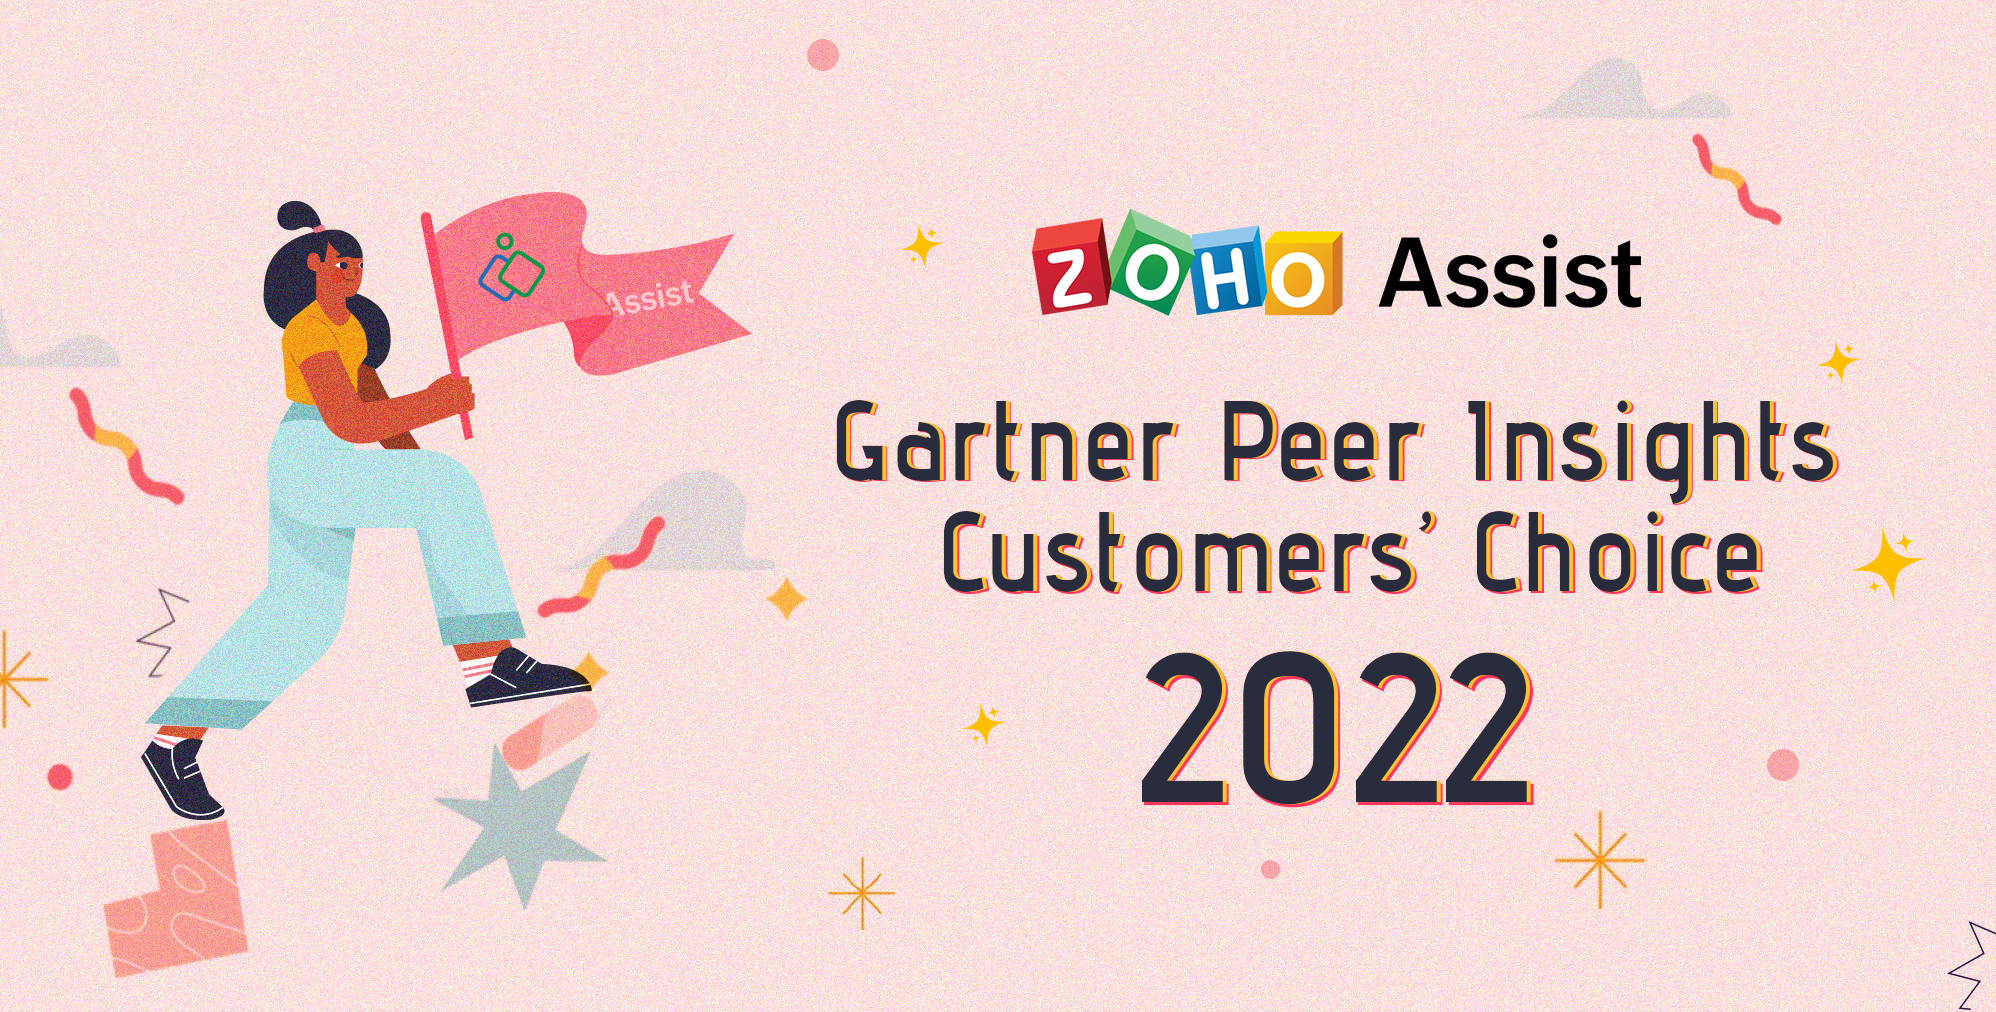 Announcing our latest recognition: Gartner® Peer Insights™ recognizes Zoho Assist as a 2022 Customers' Choice for Meeting Solutions